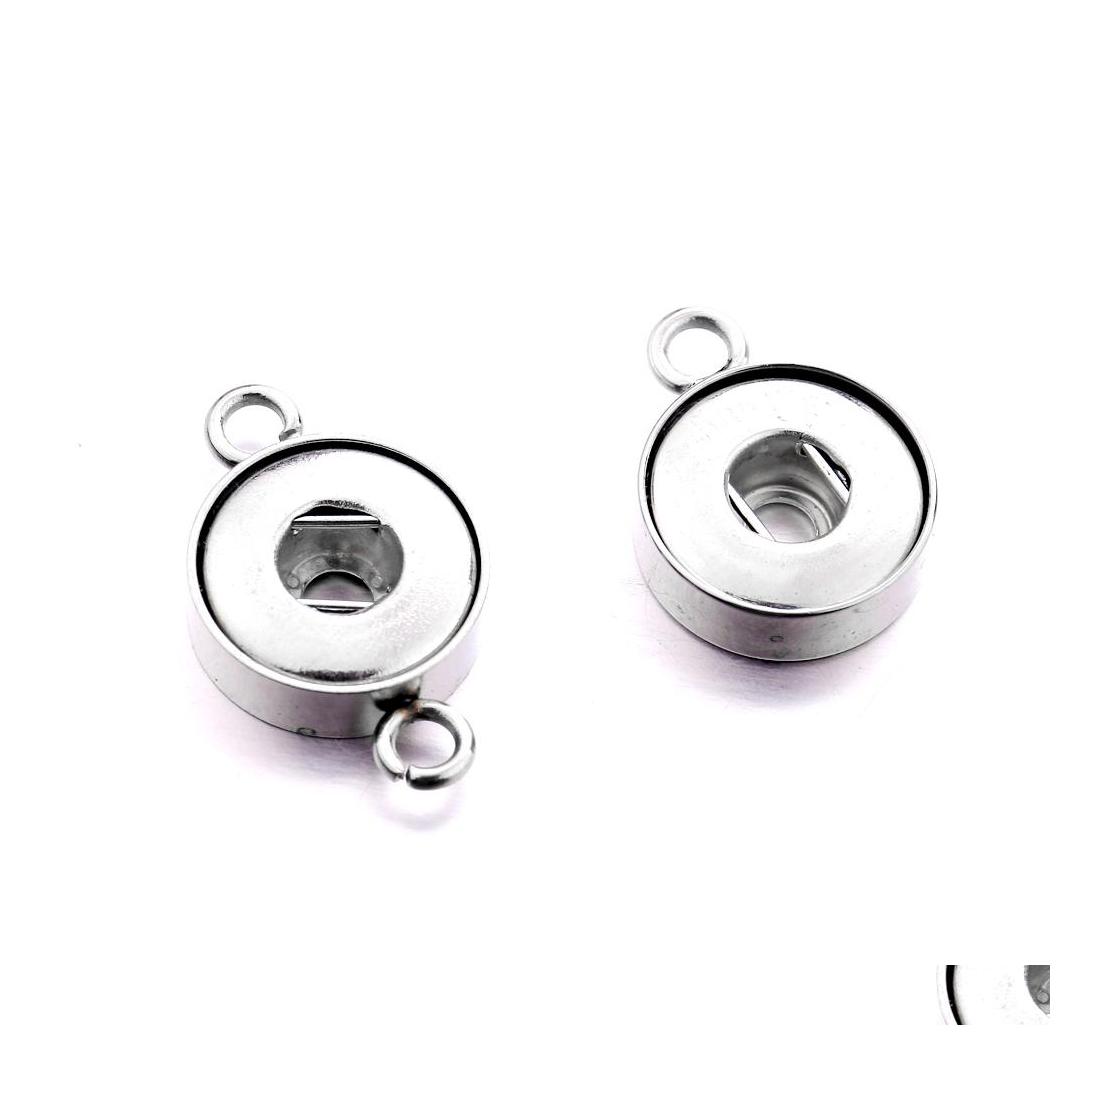 

Charms Two Ears Stainless Steel 12Mm 18Mm Snap Button Base Accessories Findings Metal Buttons To Make Diy Bracelet Necklace Snaps Dr Dhqho